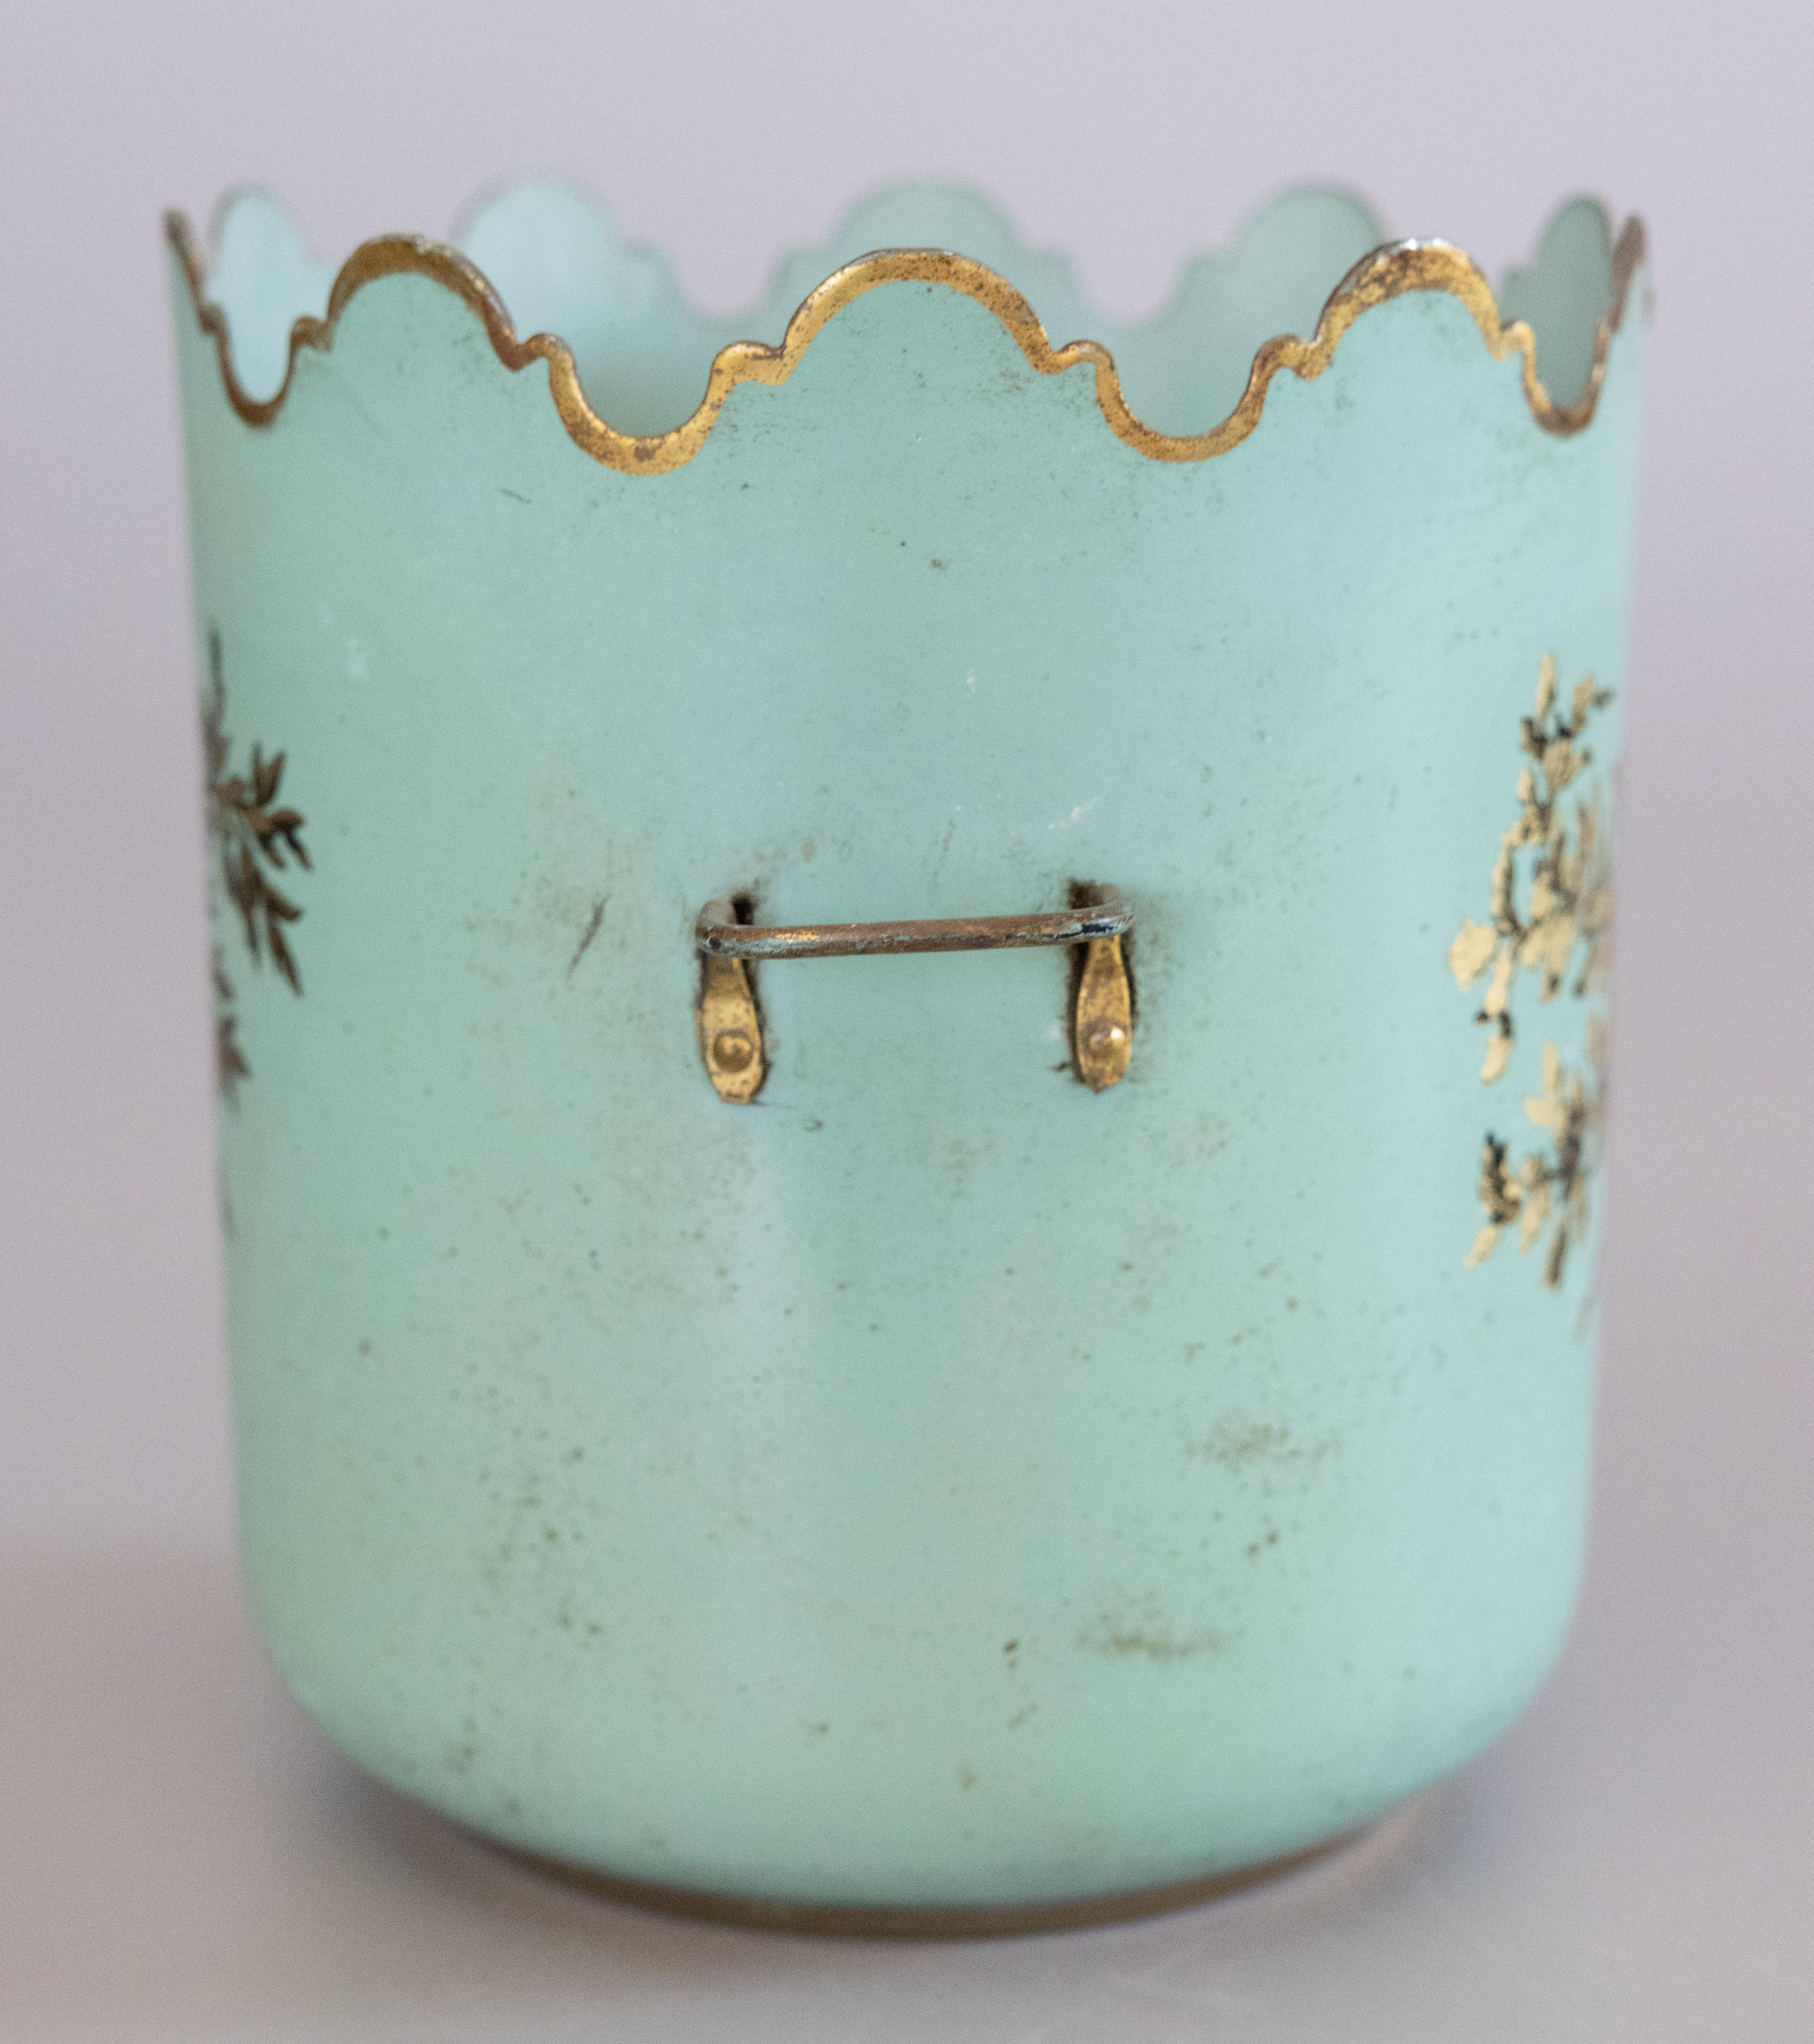 A lovely antique early 20th Century Italian turquoise and gilded tole monteith cache pot or jardiniere. Signed 